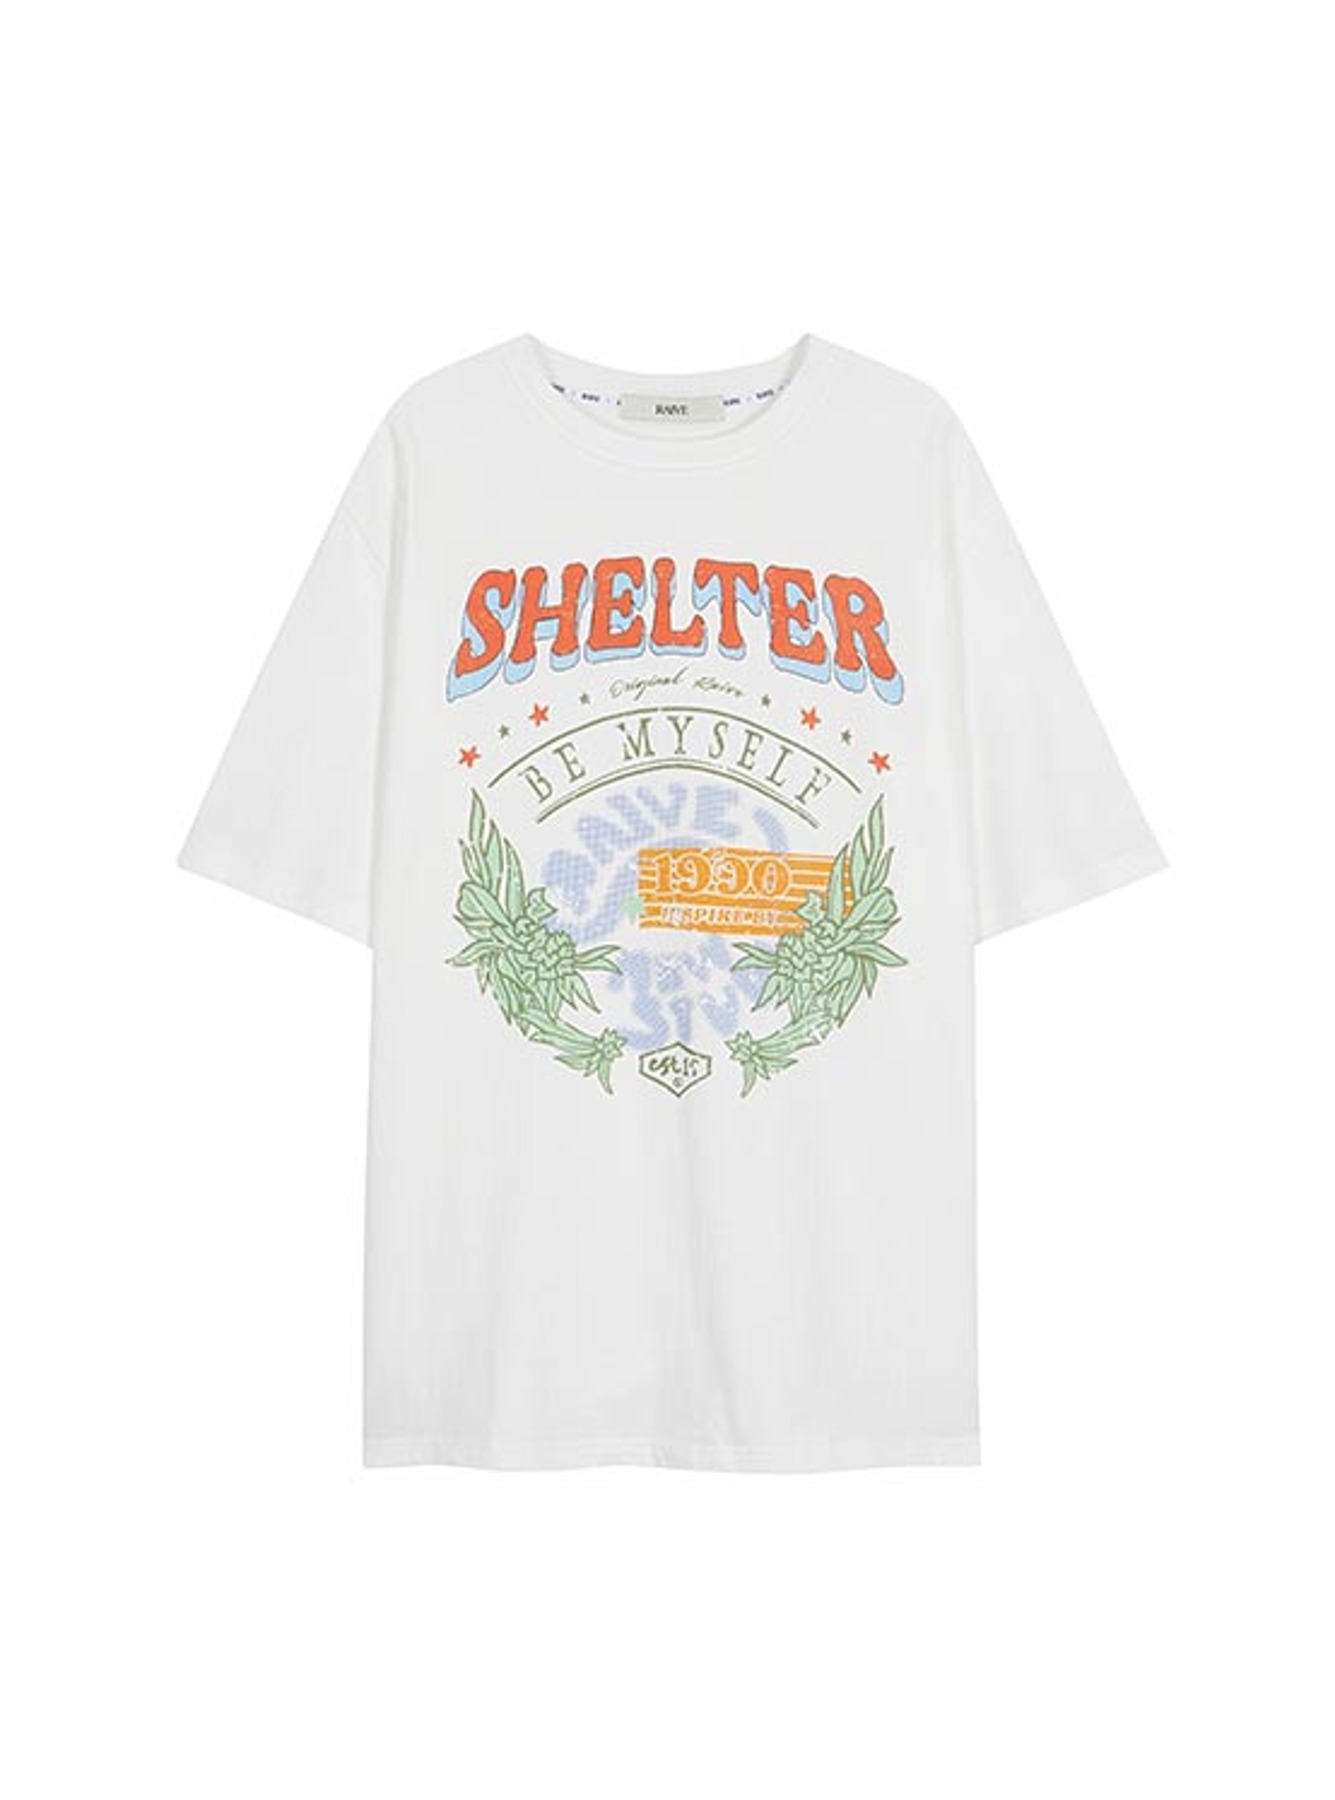 Shelter Graphic T-shirt in White VW3ME265-01